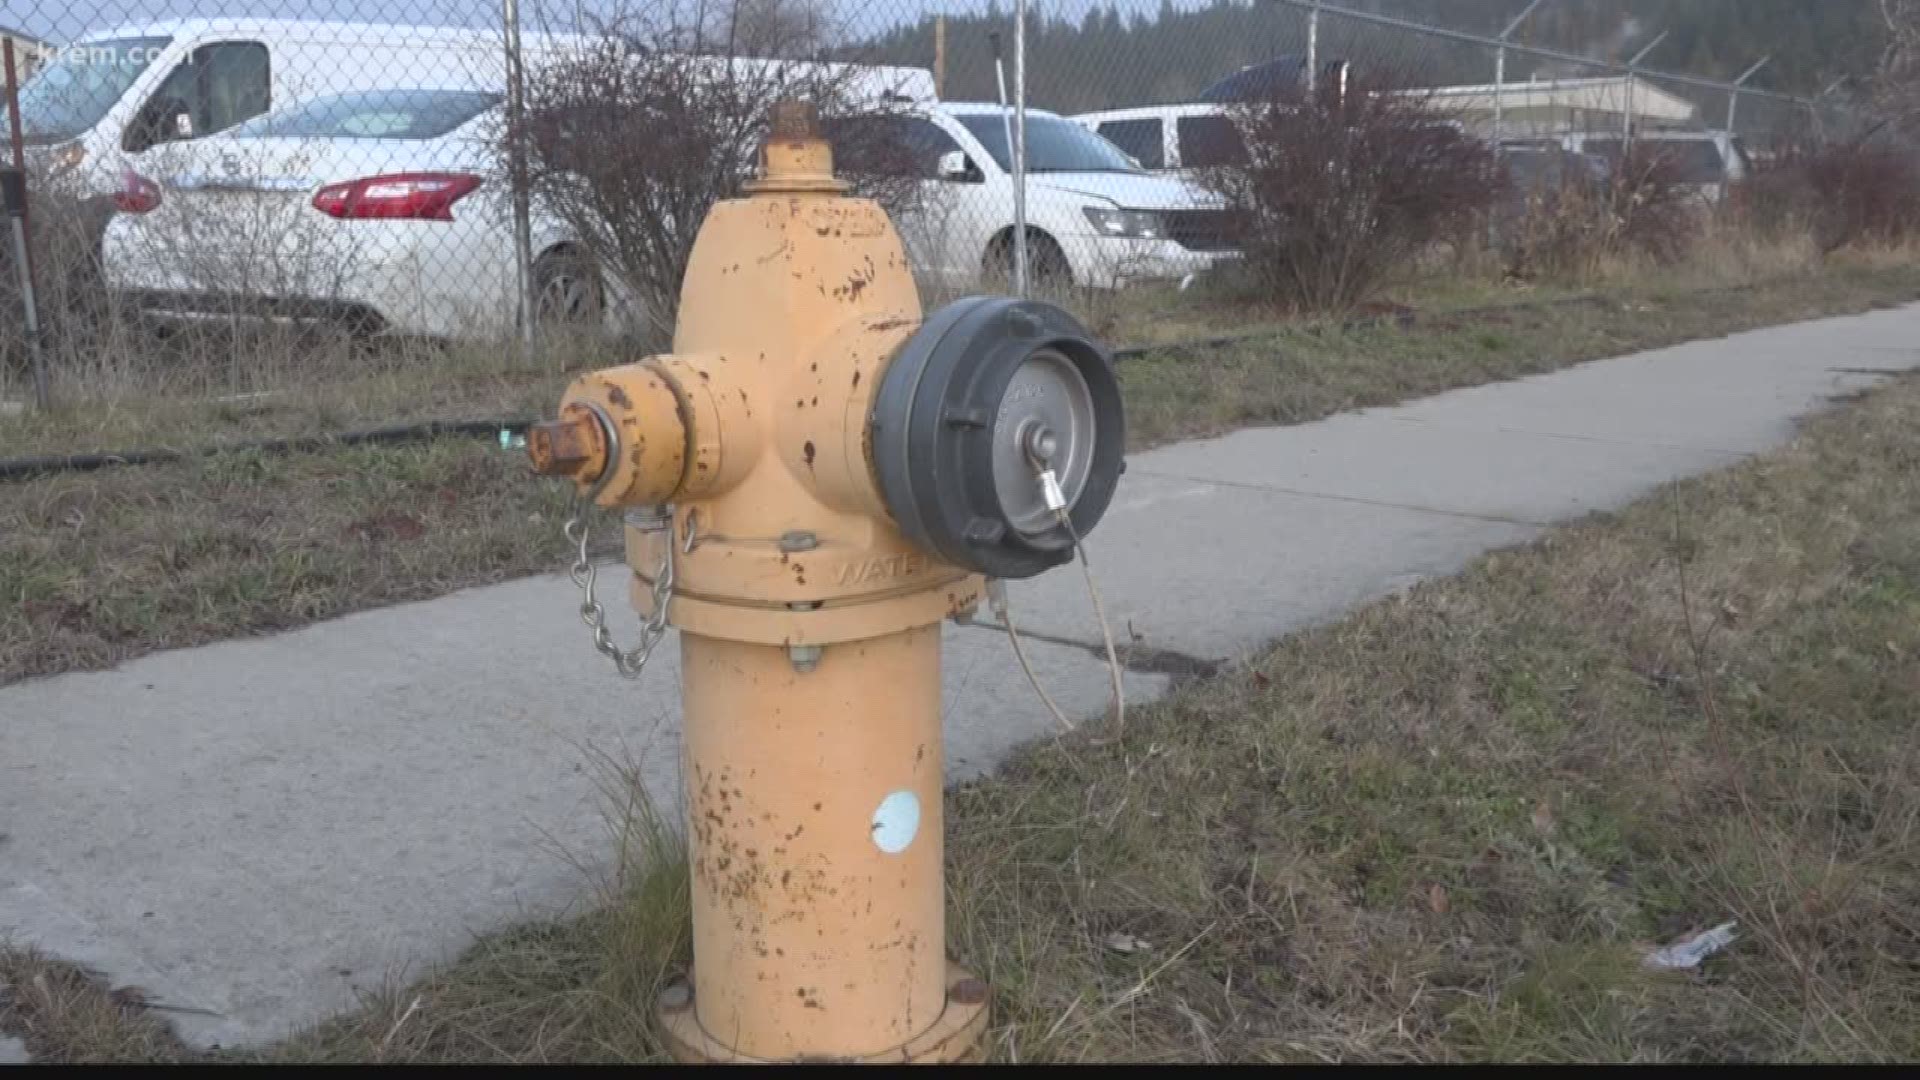 Now that several months have passed since that contamination incident, KREM 2 checked in to see what the city has done to keep this from happening again.